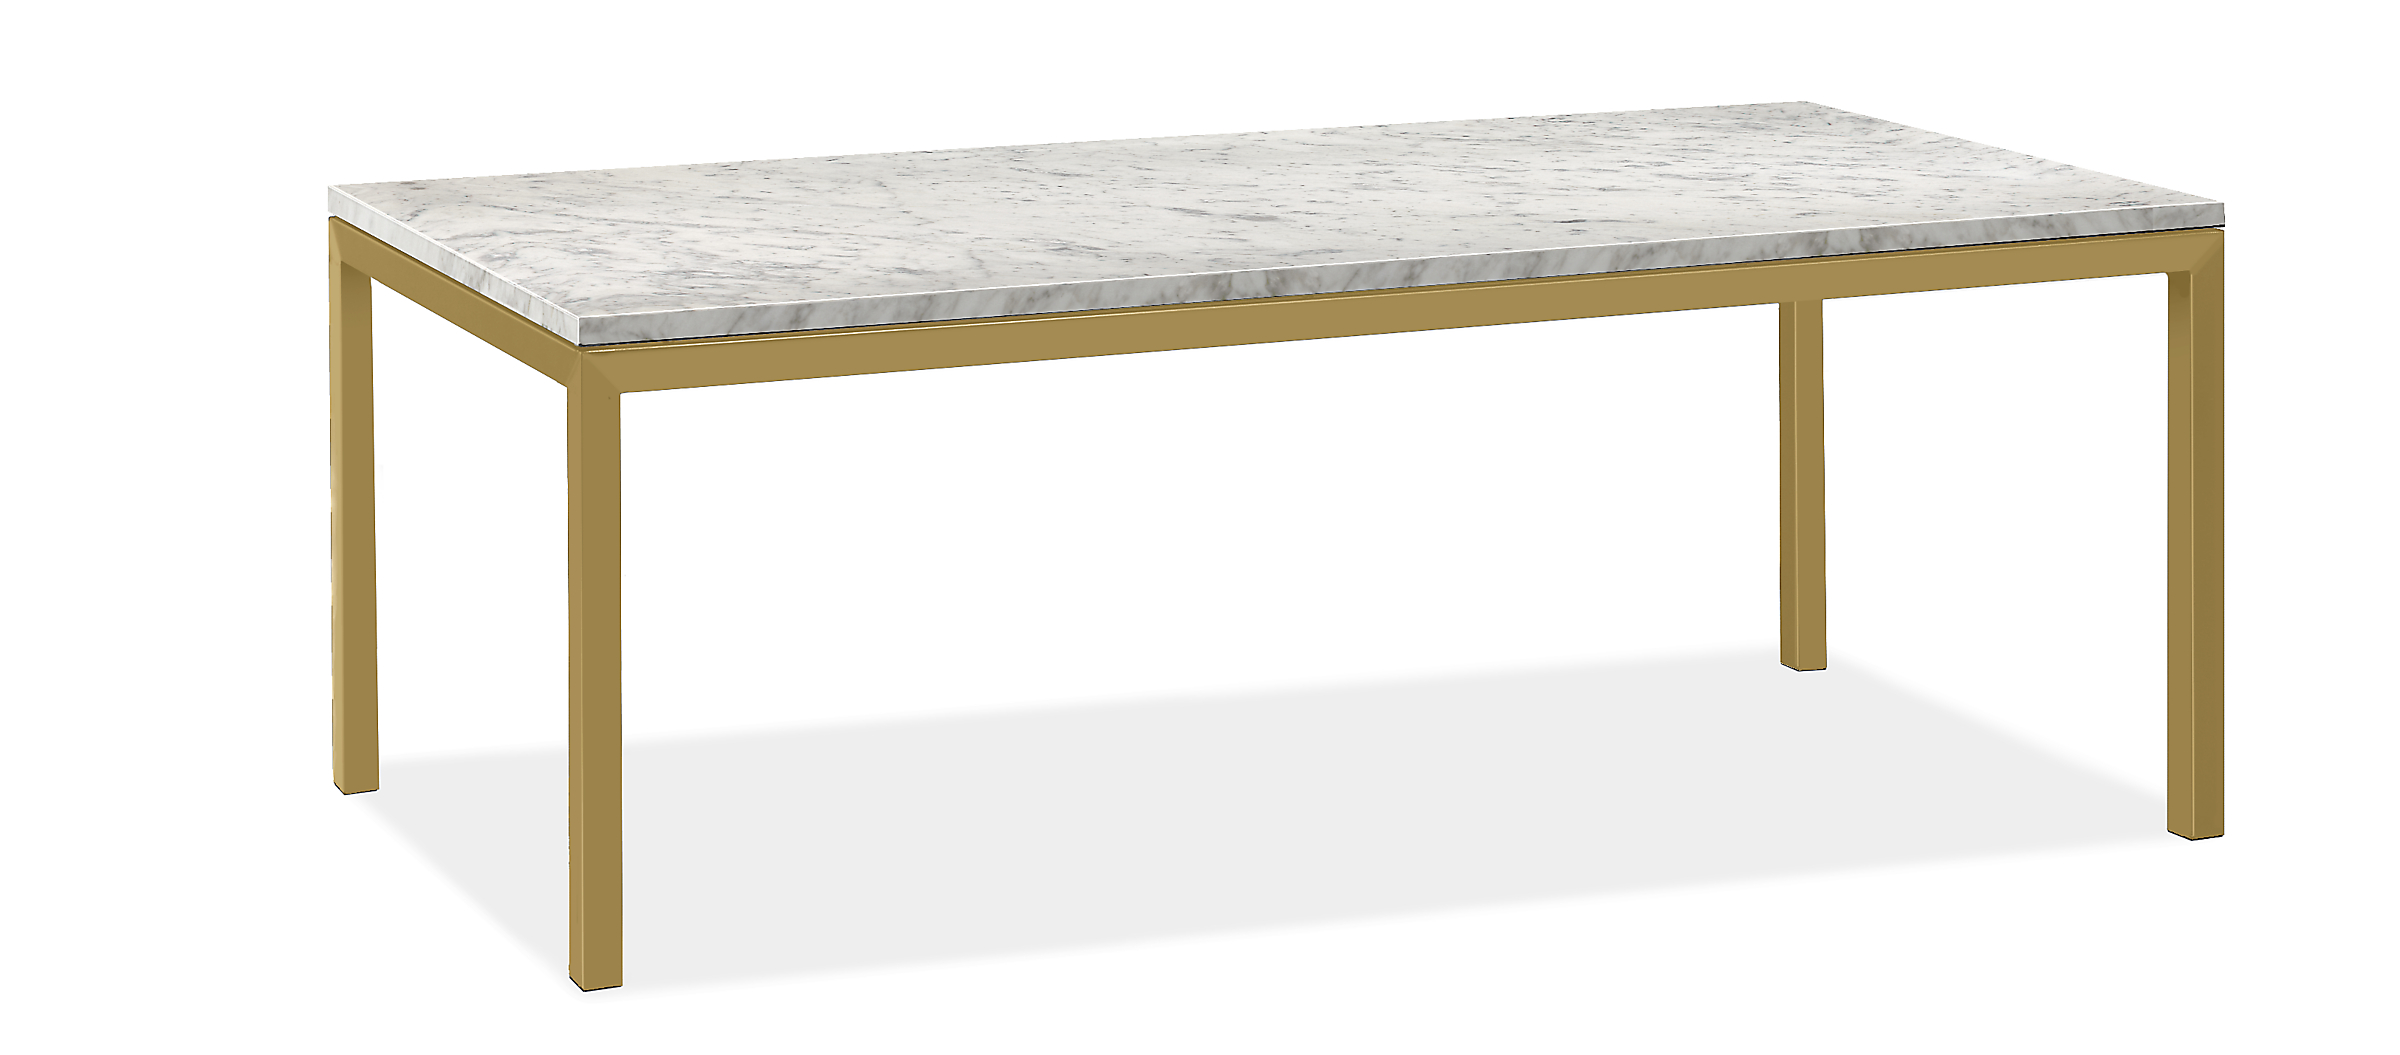 Parsons 80w 28d 28h Table w/1.5" Gold Base and White Venatino Marble Top